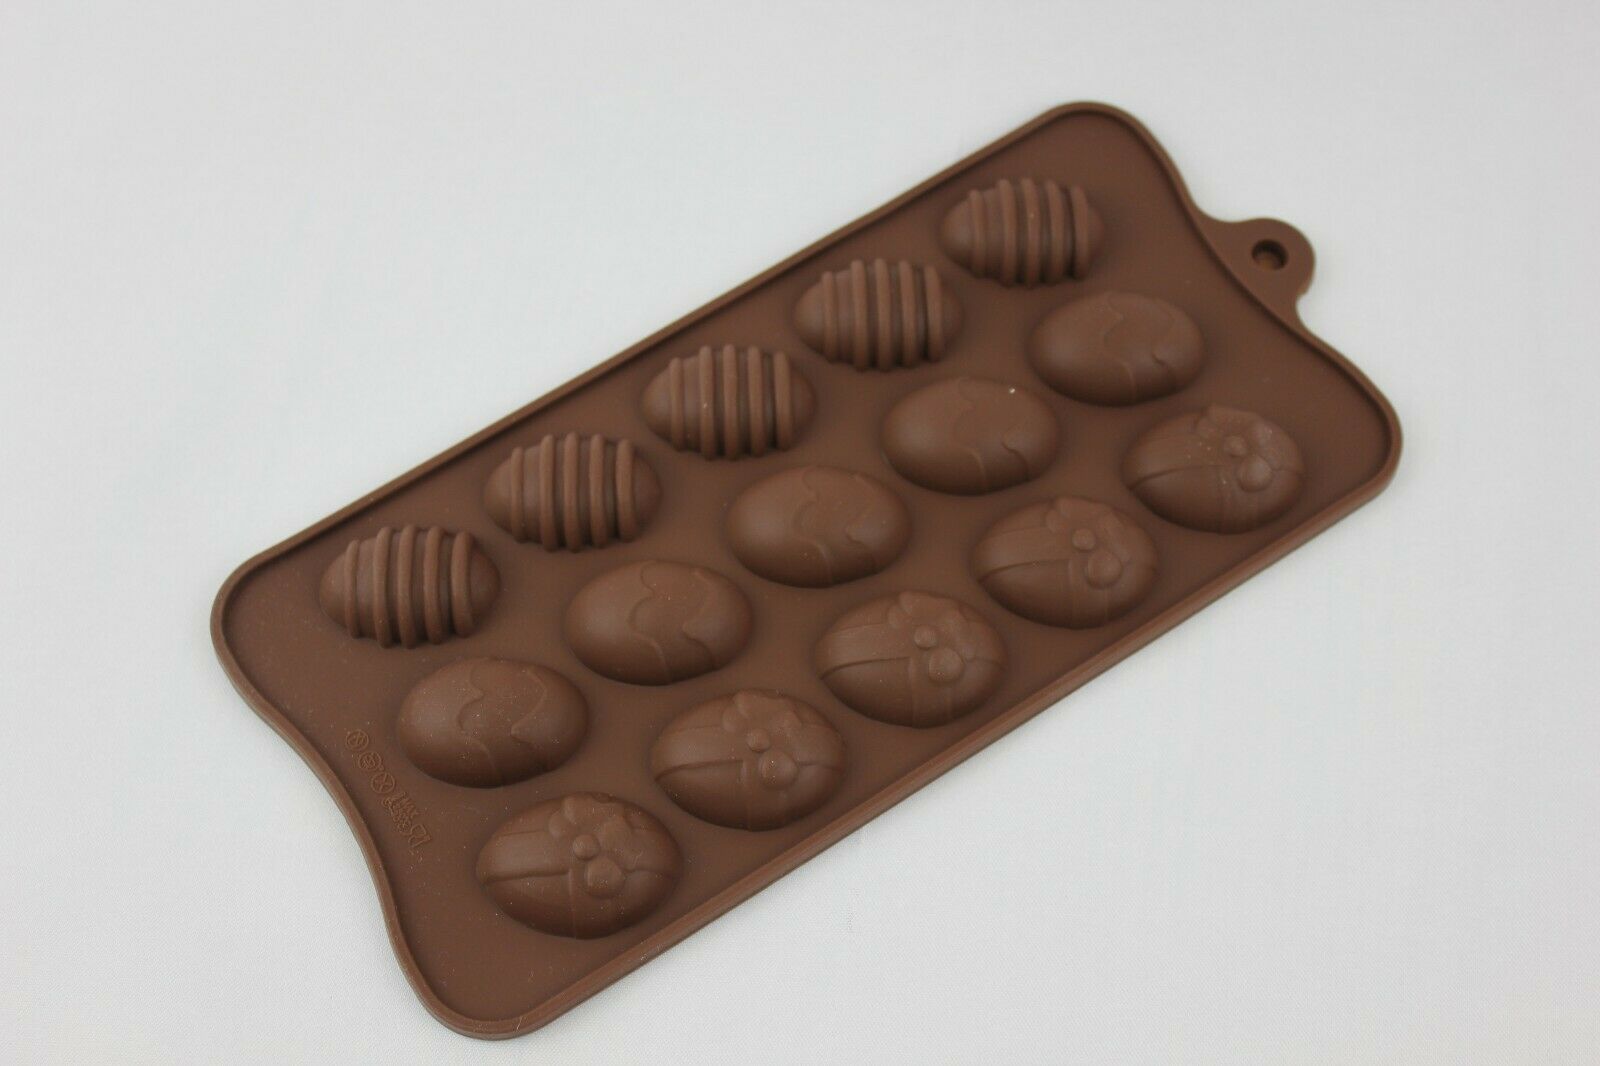 attachment-https://www.cupcakeaddicts.co.uk/wp-content/uploads/imported/7/Silicone-Easter-egg-15-cell-Chocolate-Mould-324445325657-3.jpg